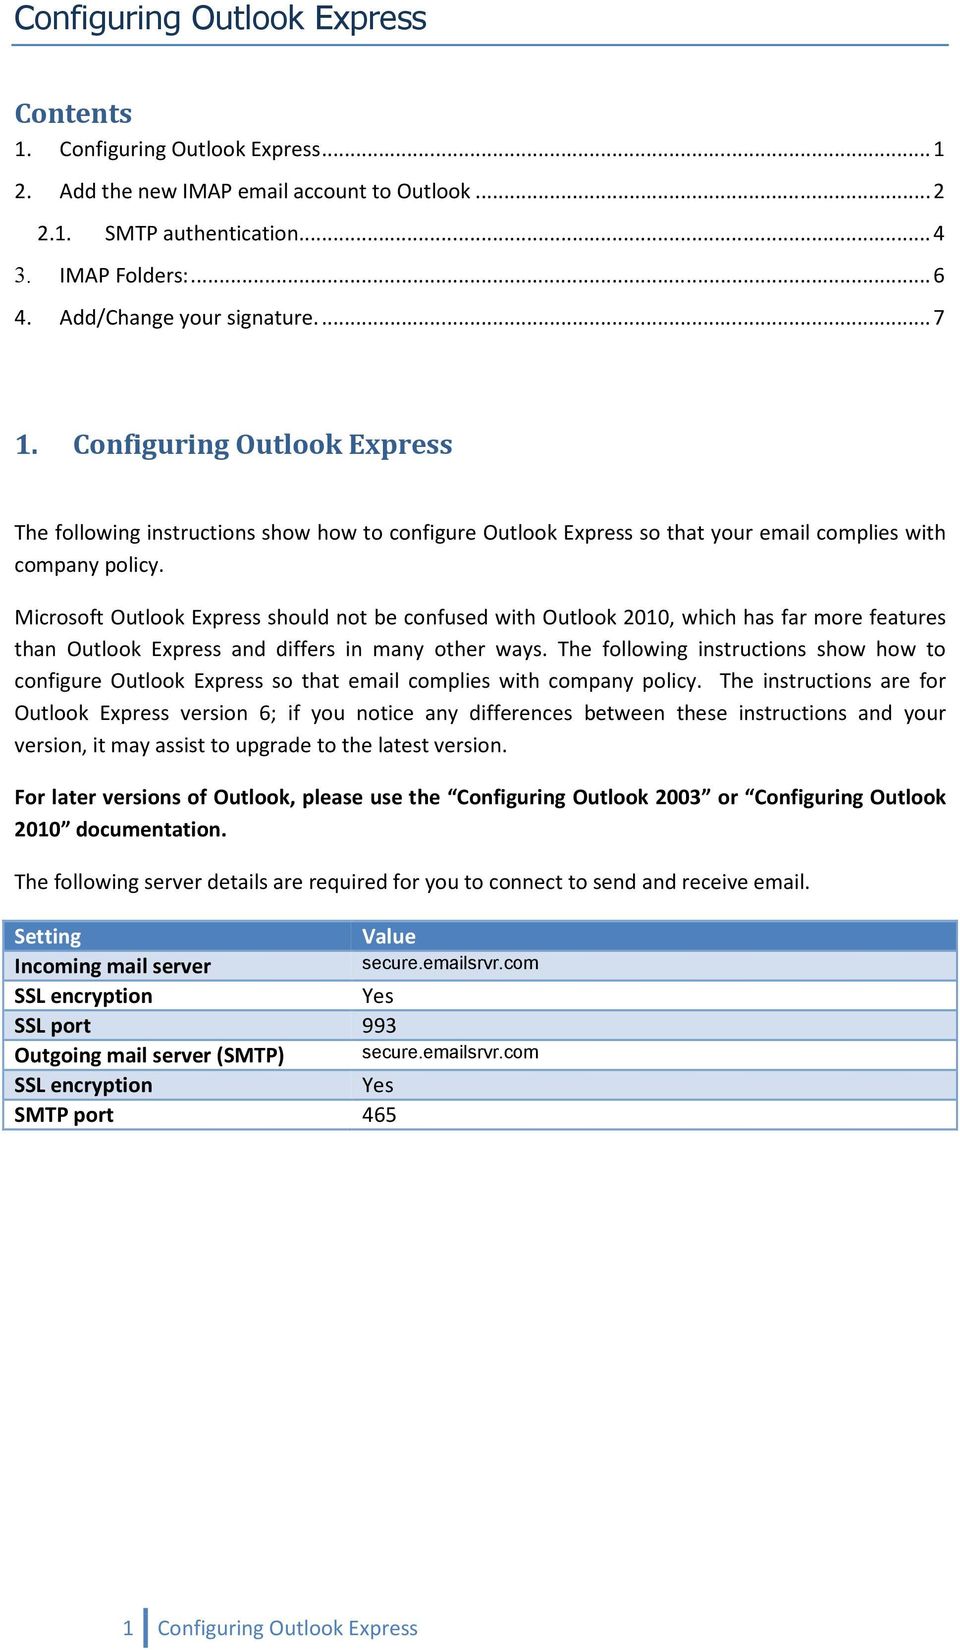 Microsoft Outlook Express should not be confused with Outlook 2010, which has far more features than Outlook Express and differs in many other ways.